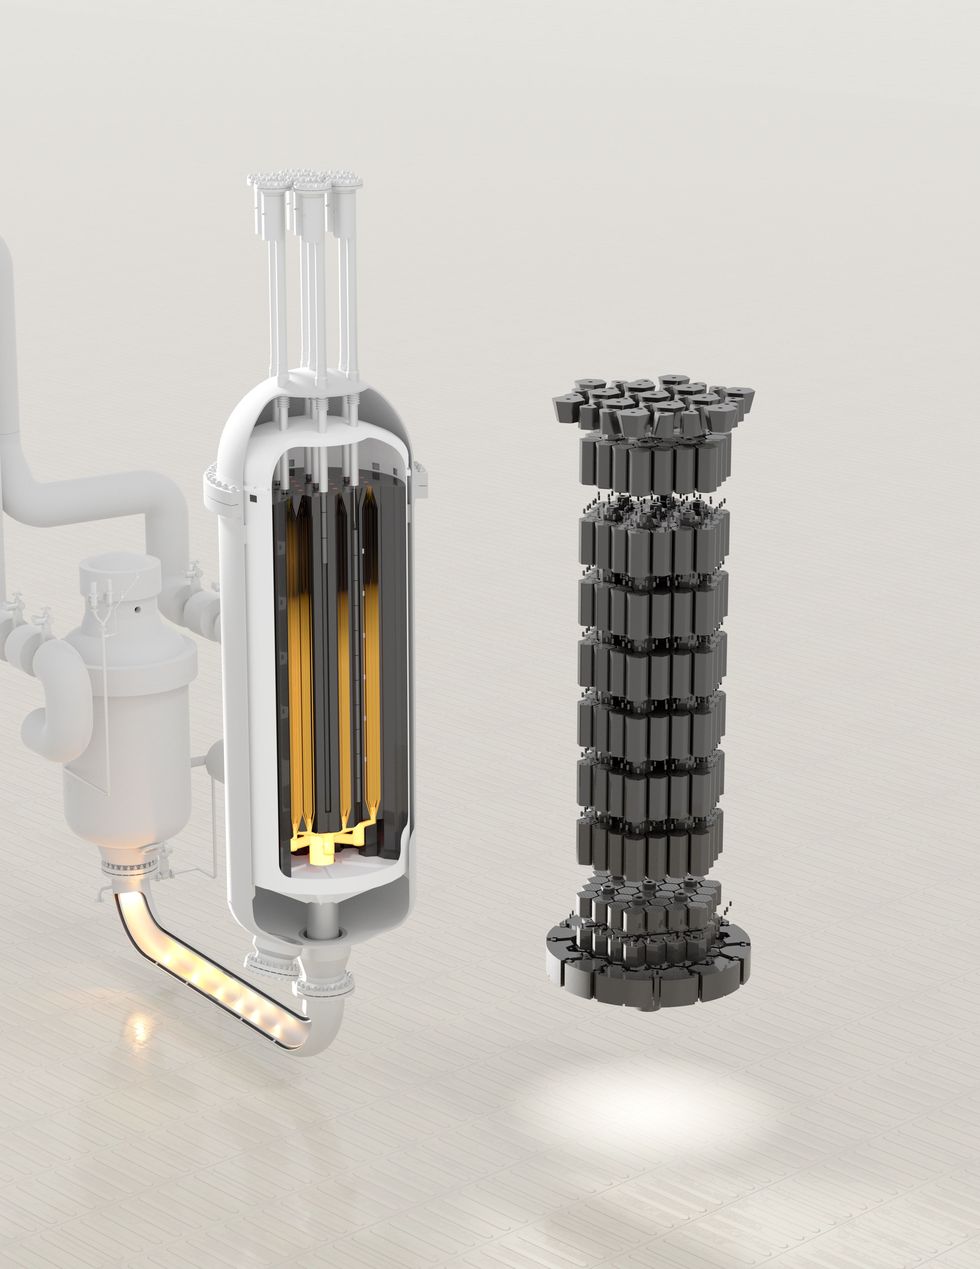 each usnc reactor has a graphite core that houses the fuel